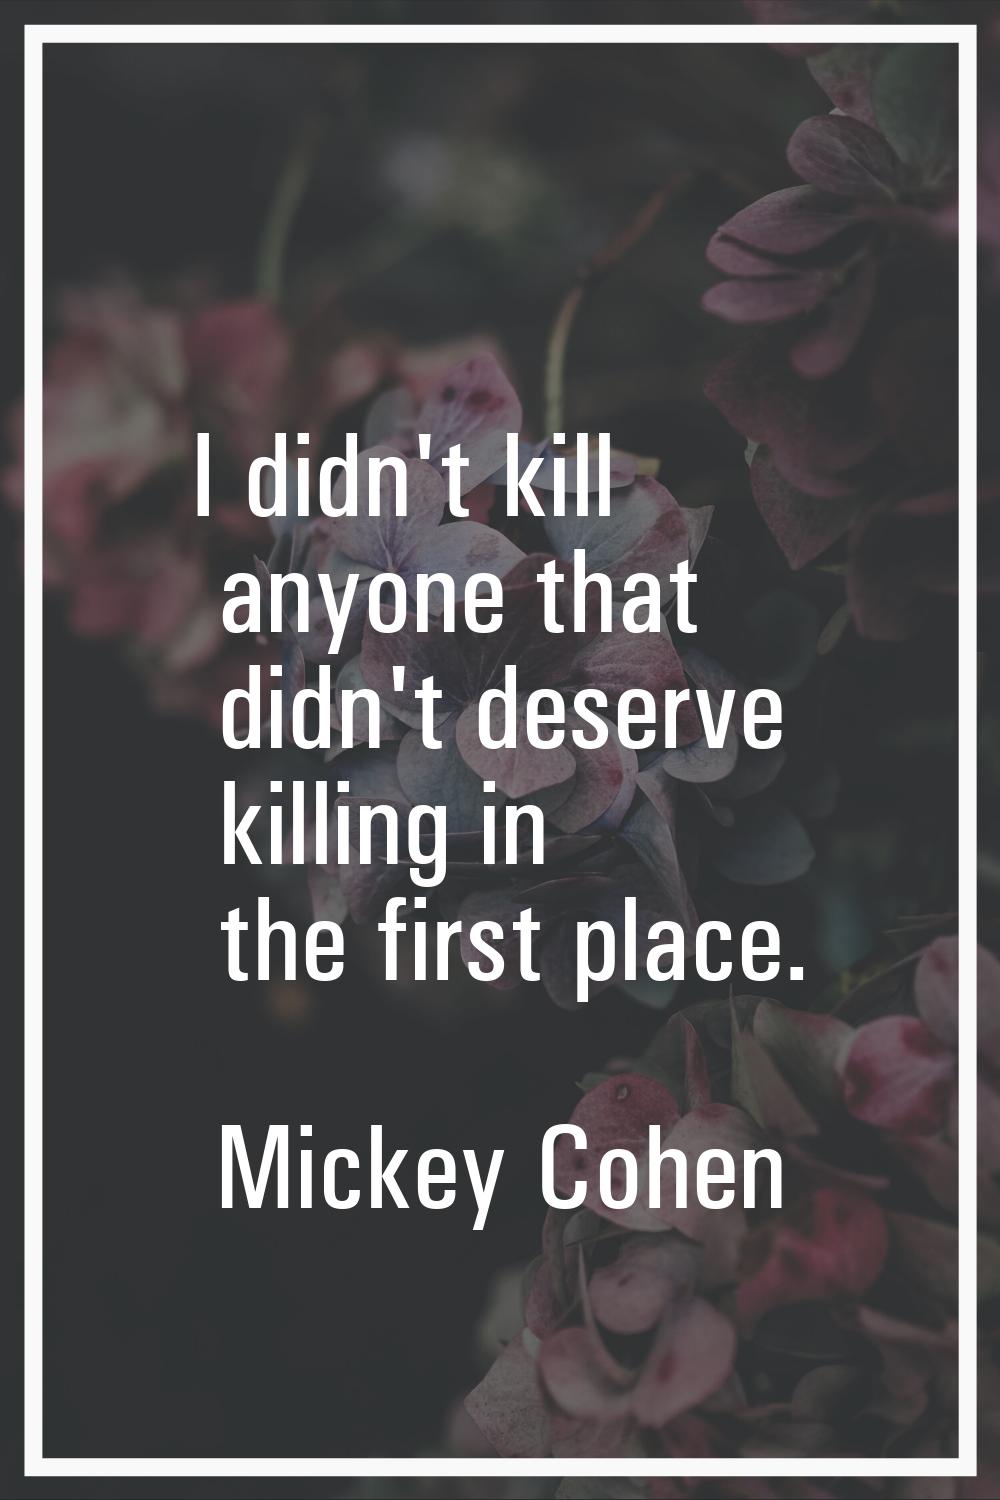 I didn't kill anyone that didn't deserve killing in the first place.